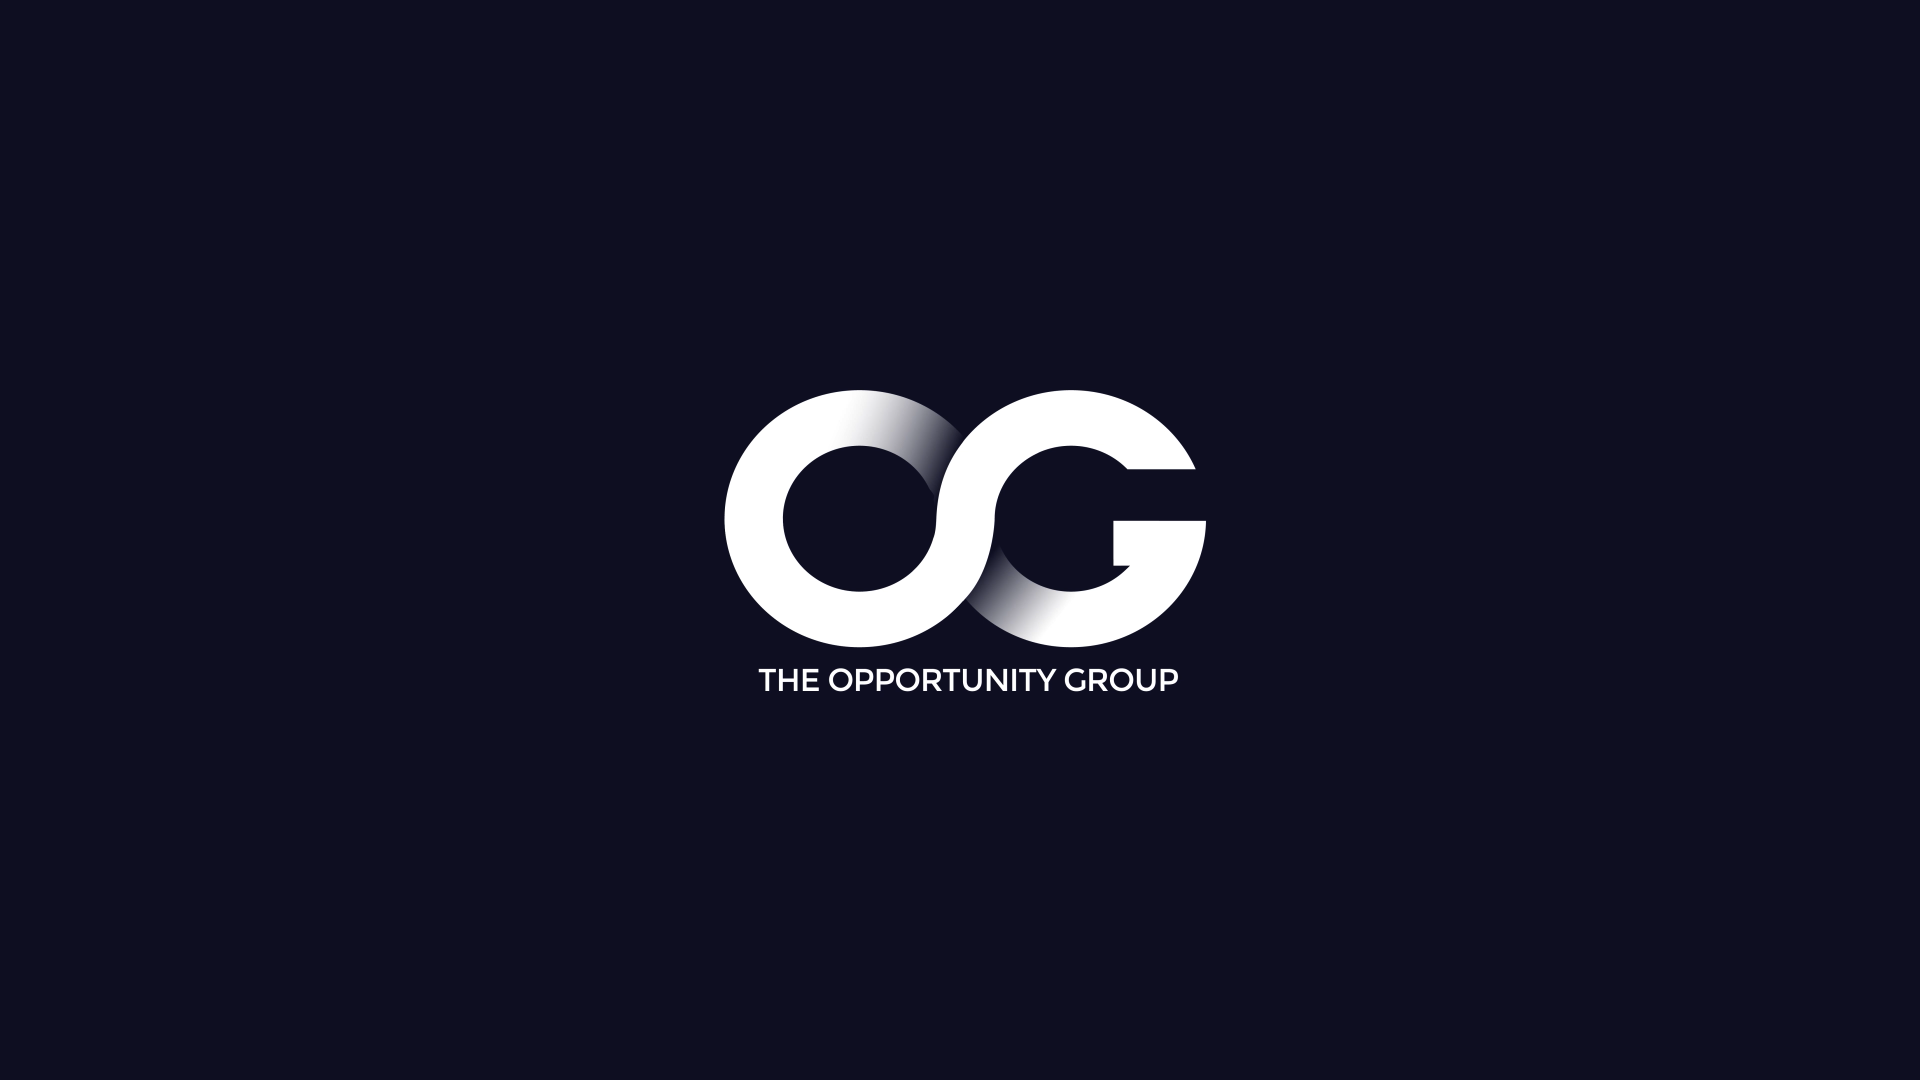 The Opportunity Group logo